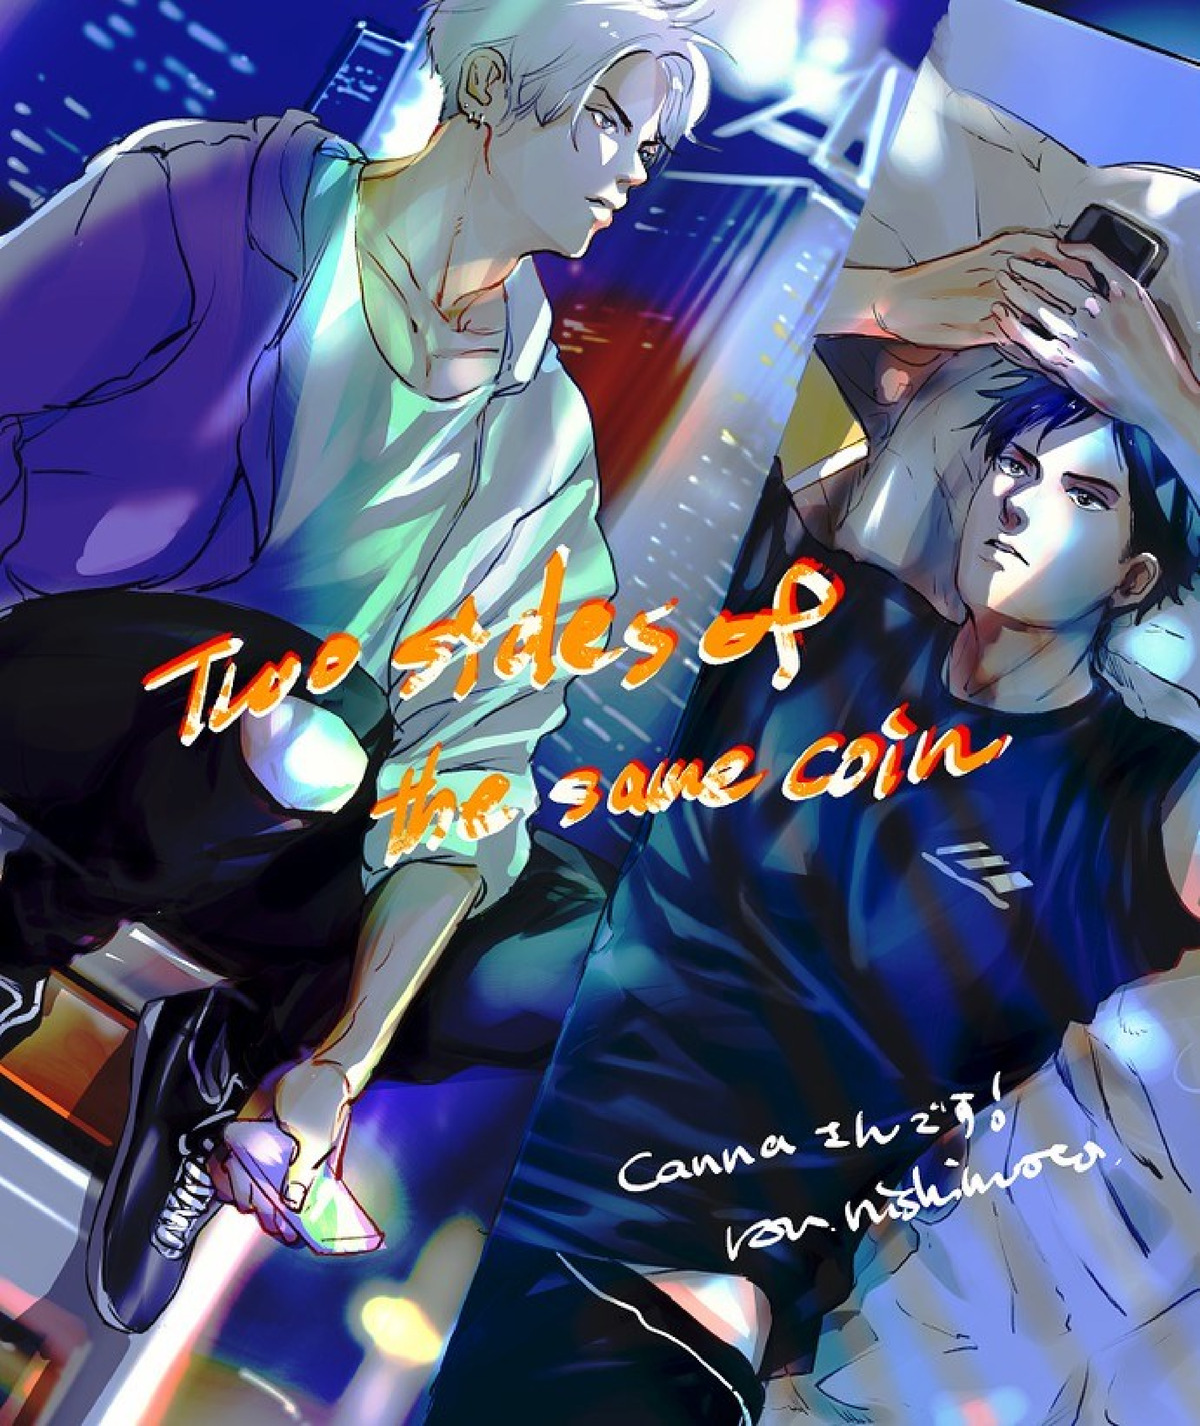 【Two sides of the same coin[耽美]】漫画-（上卷01-02）章节漫画下拉式图片-58.jpg